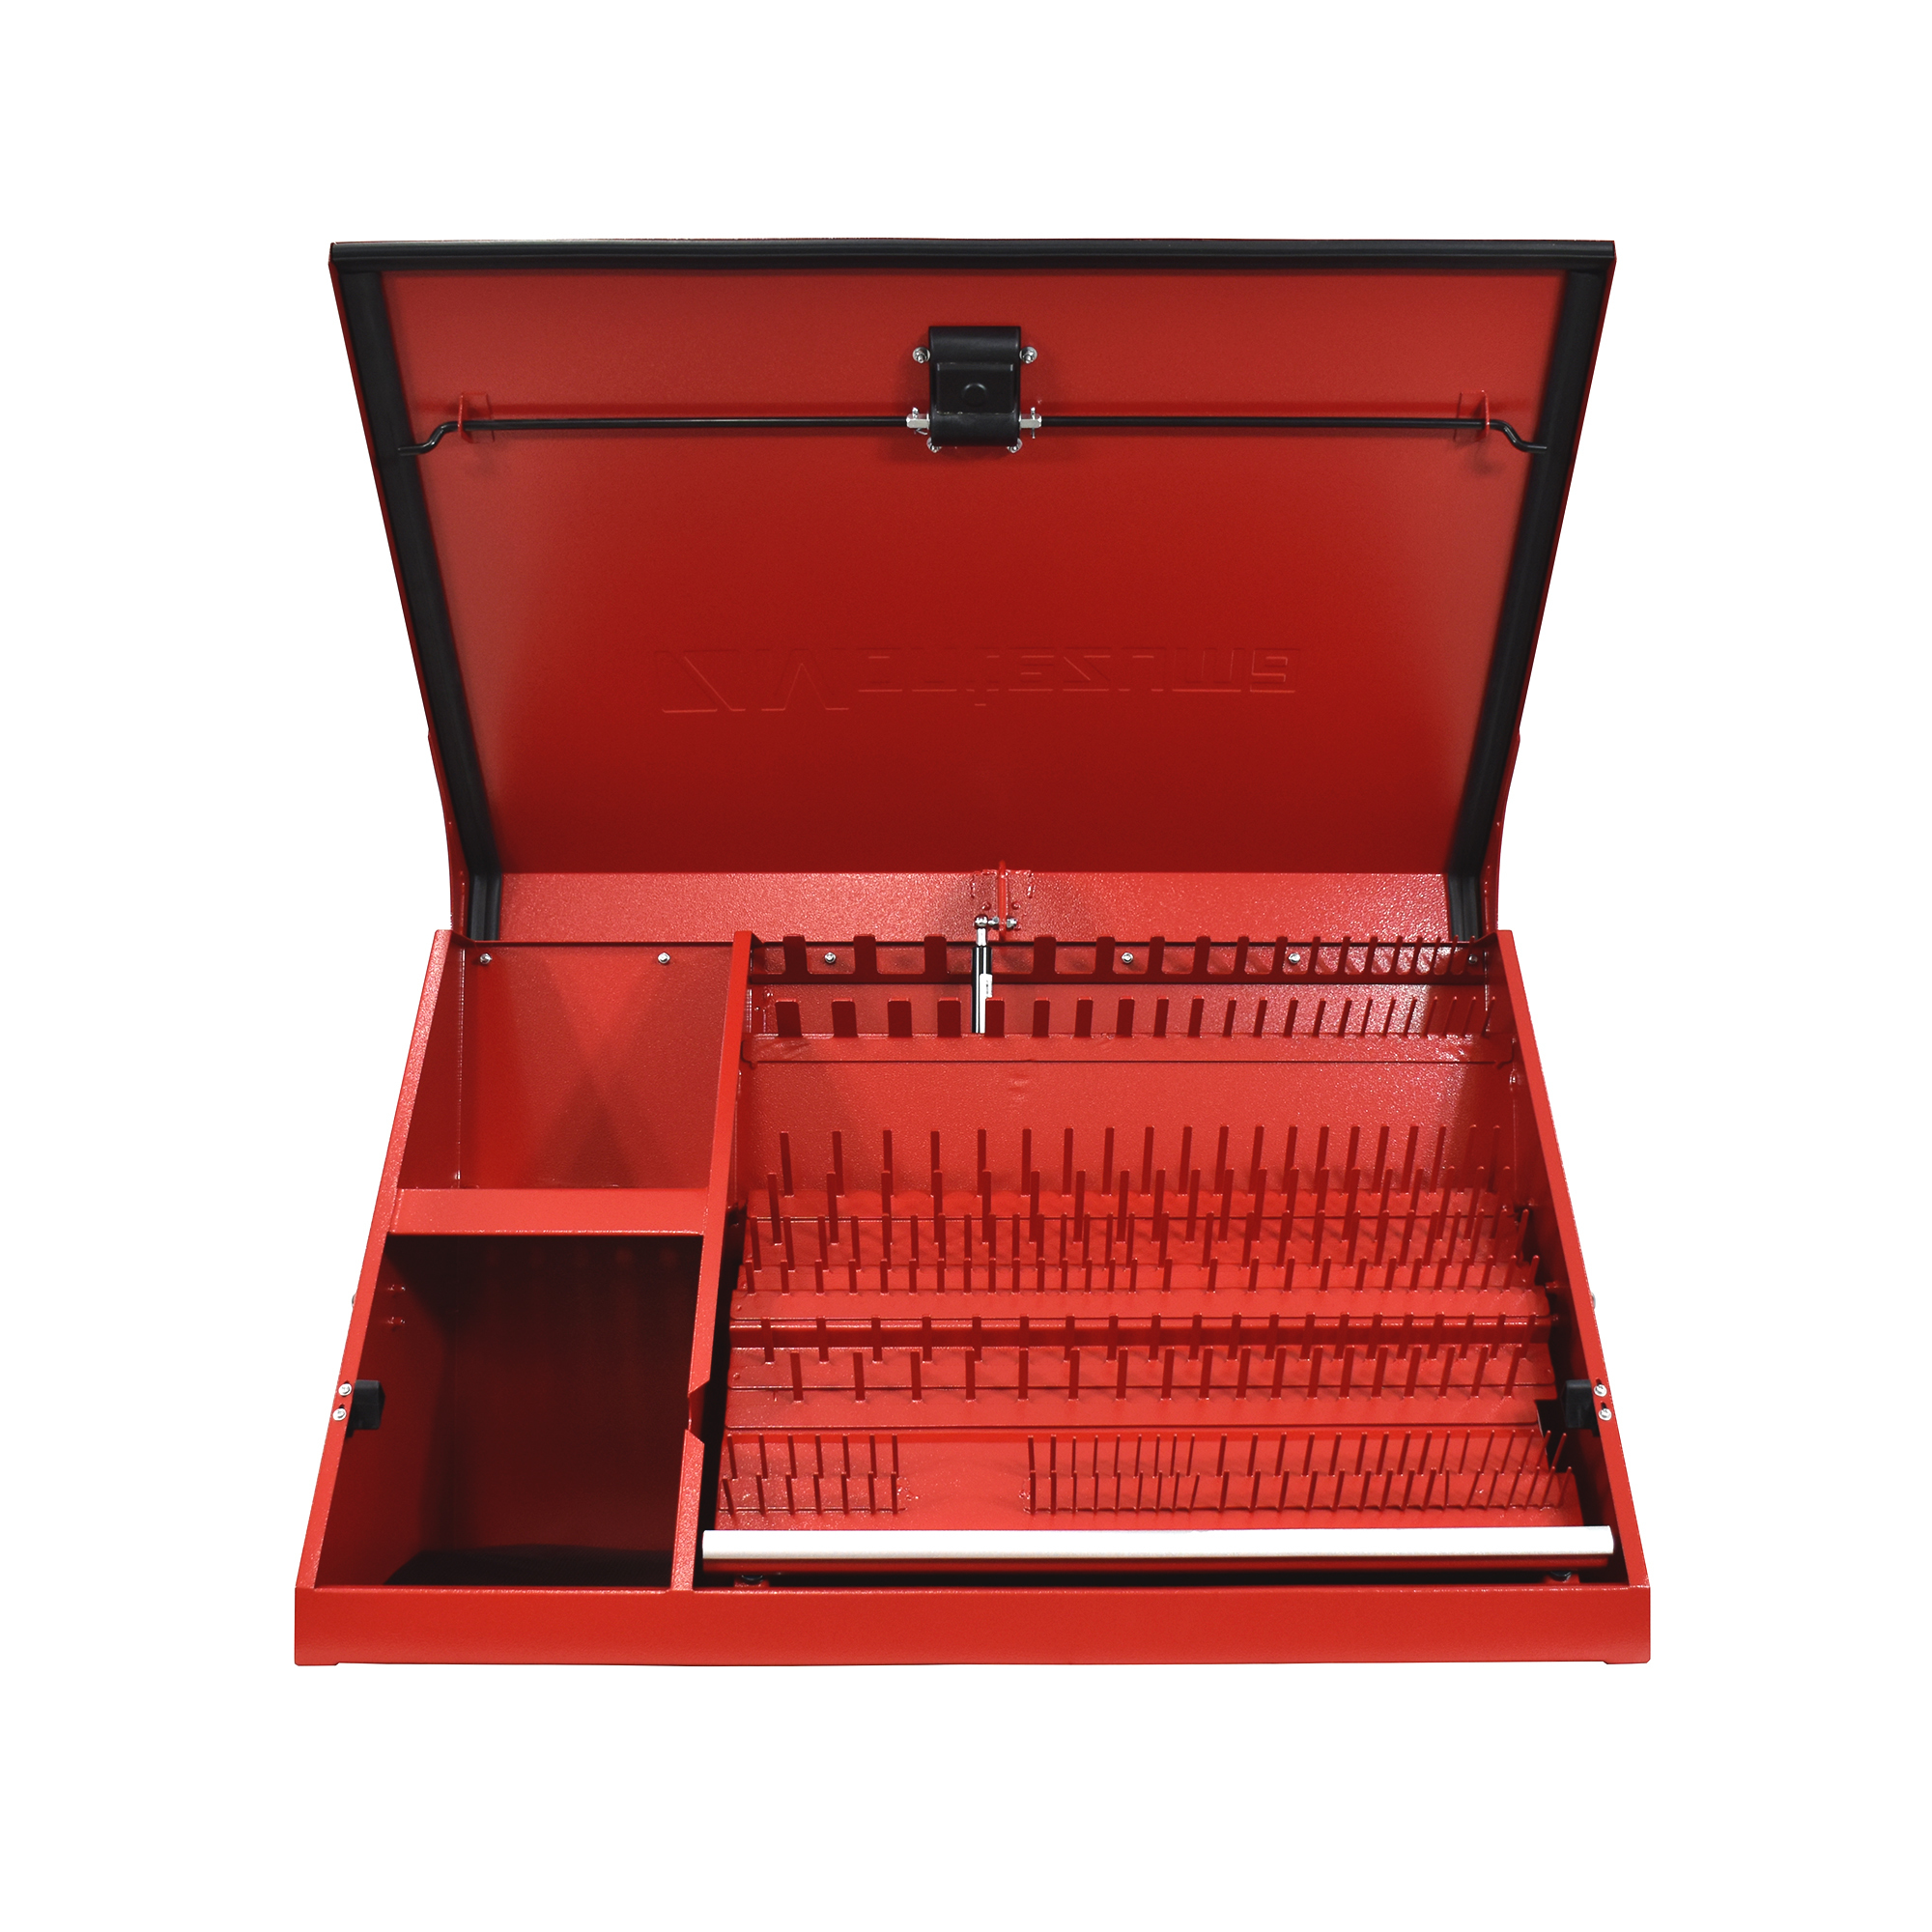 Montezuma, 36Inch x 17Inch Triangle Toolbox (steel, red), Width 36.81 in, Height 21.61 in, Color Red, Model XL450-R23